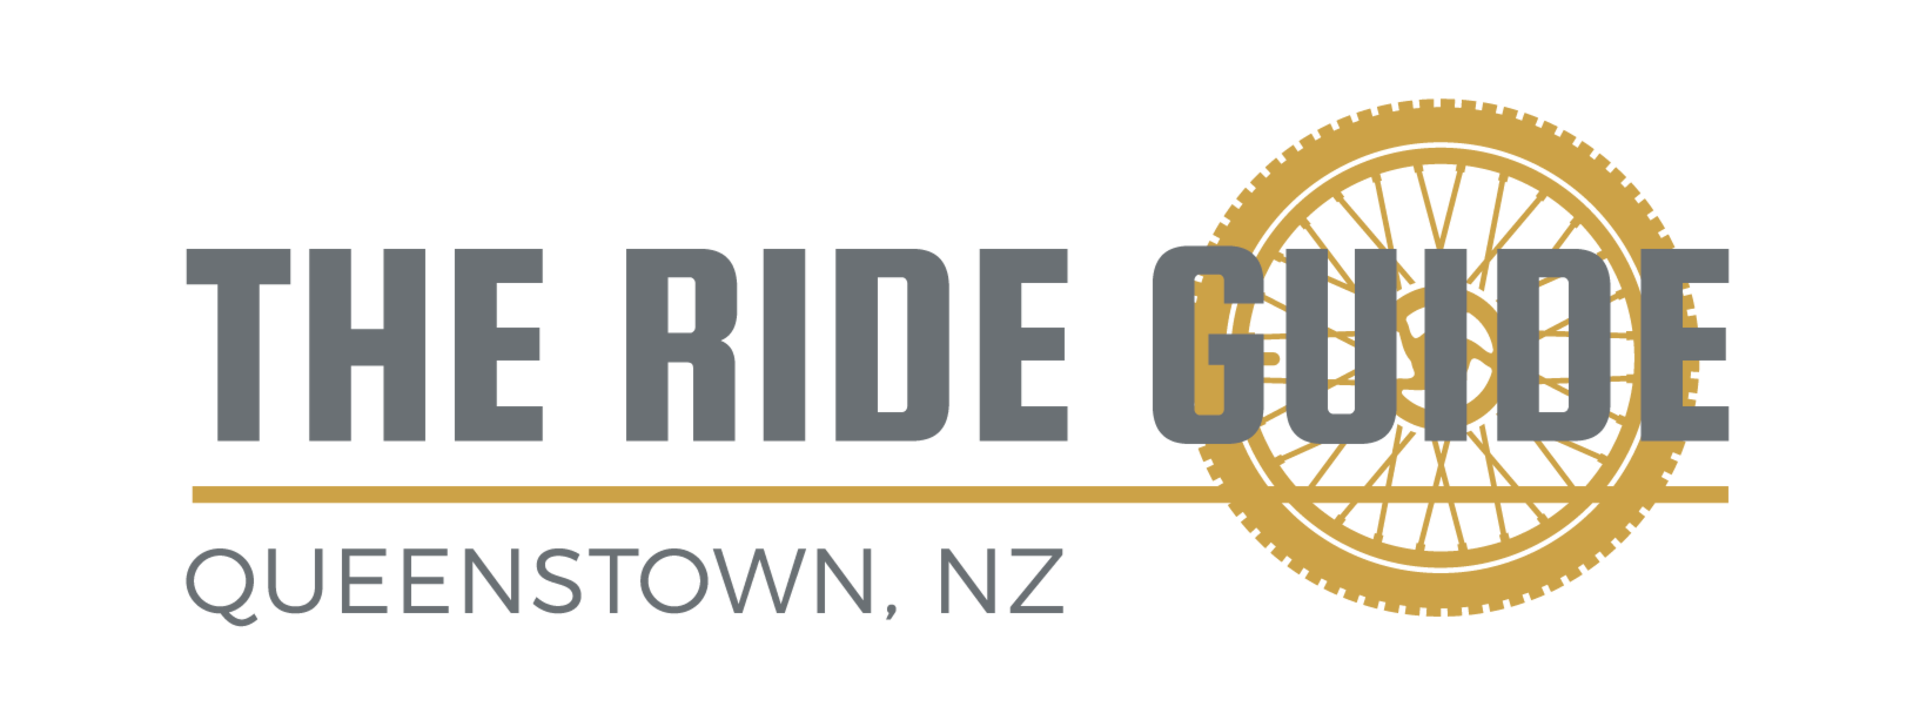 the-ride-guide-logo-png.png